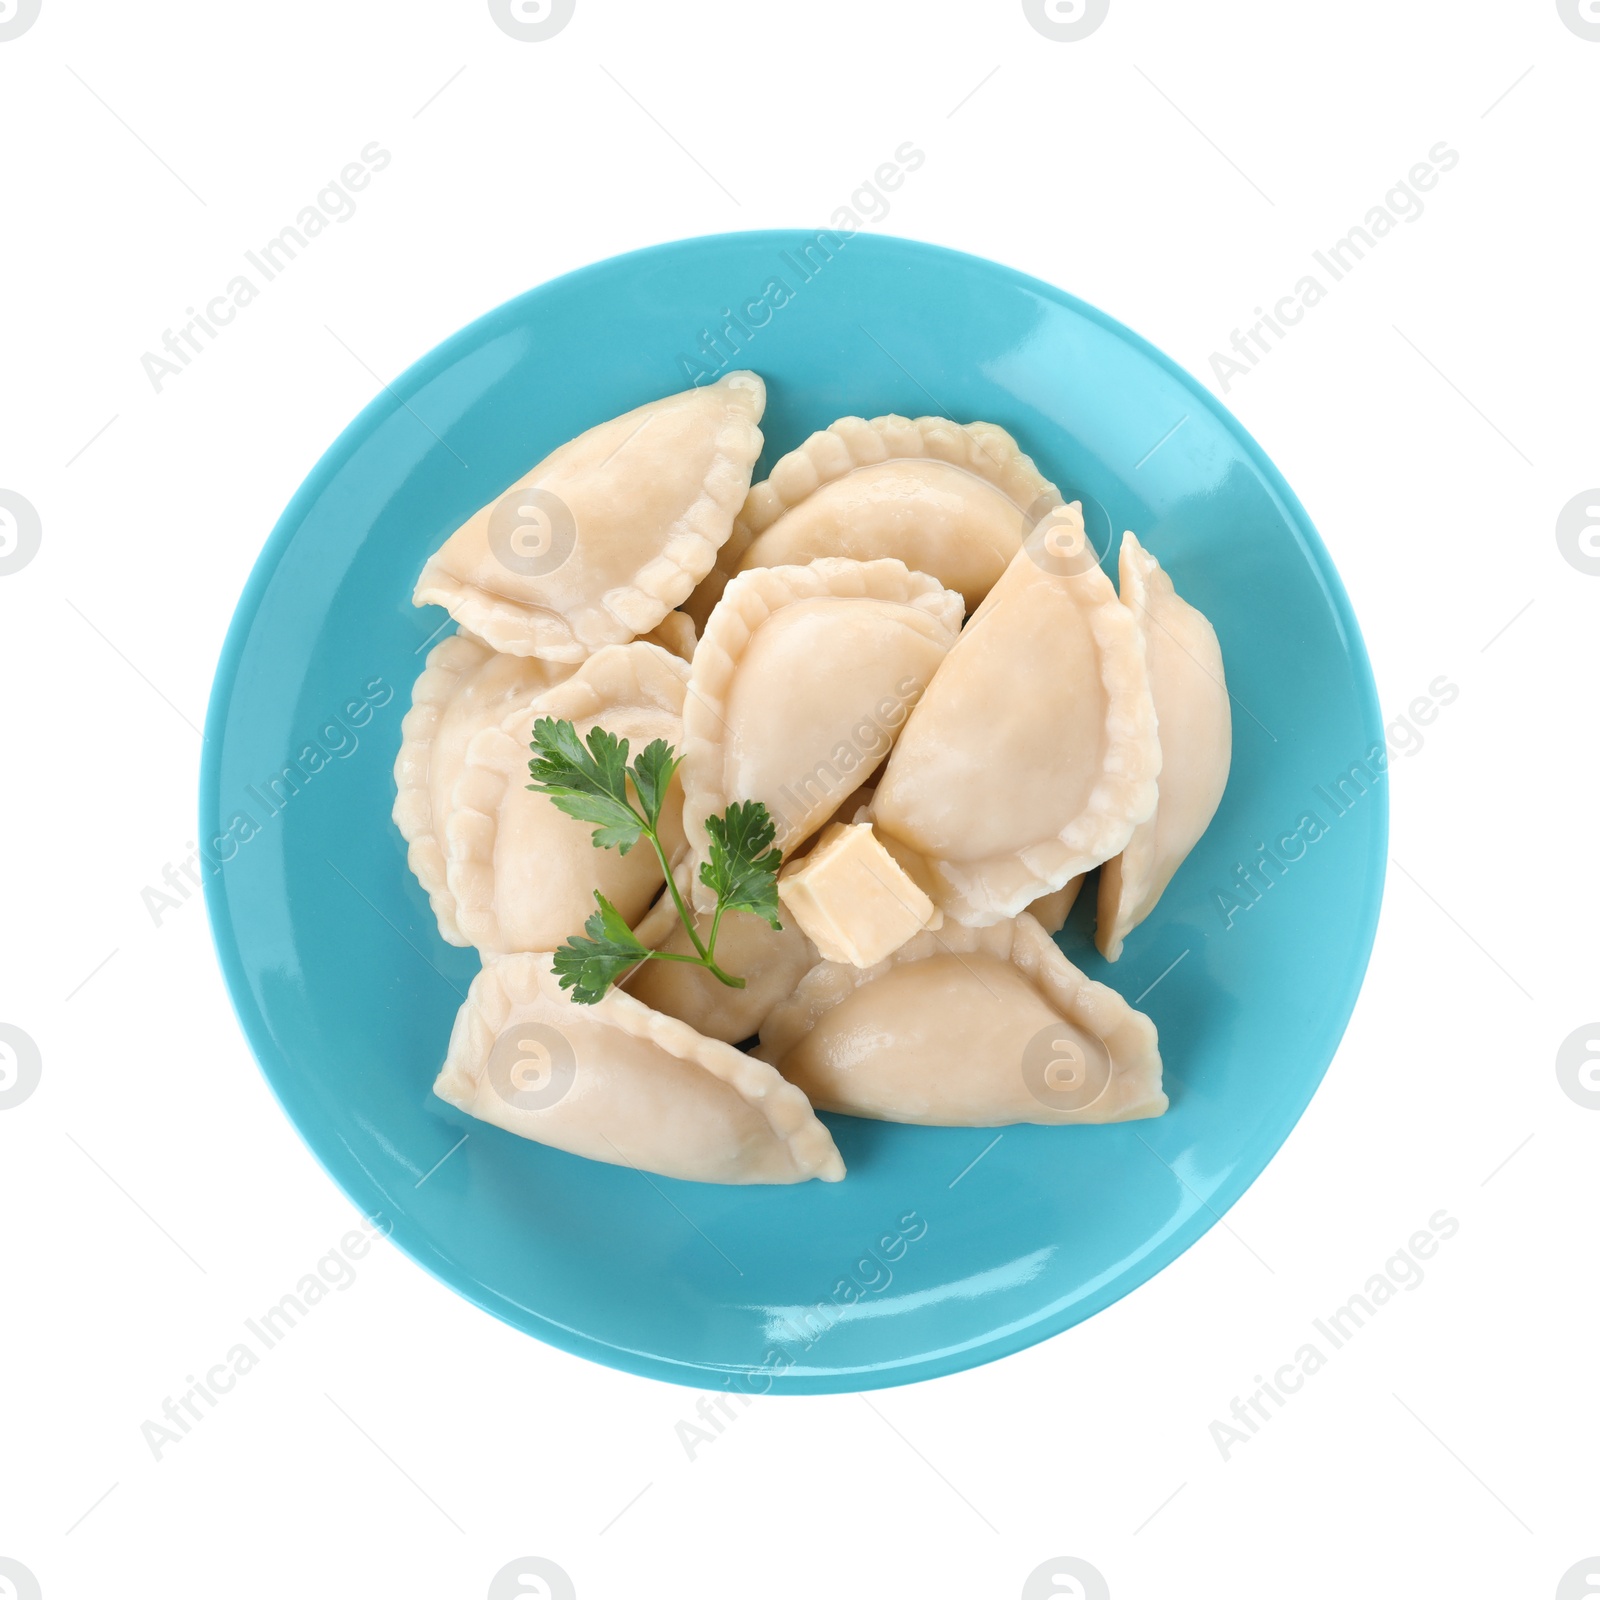 Photo of Plate of tasty dumplings served with parsley and butter on white background, top view